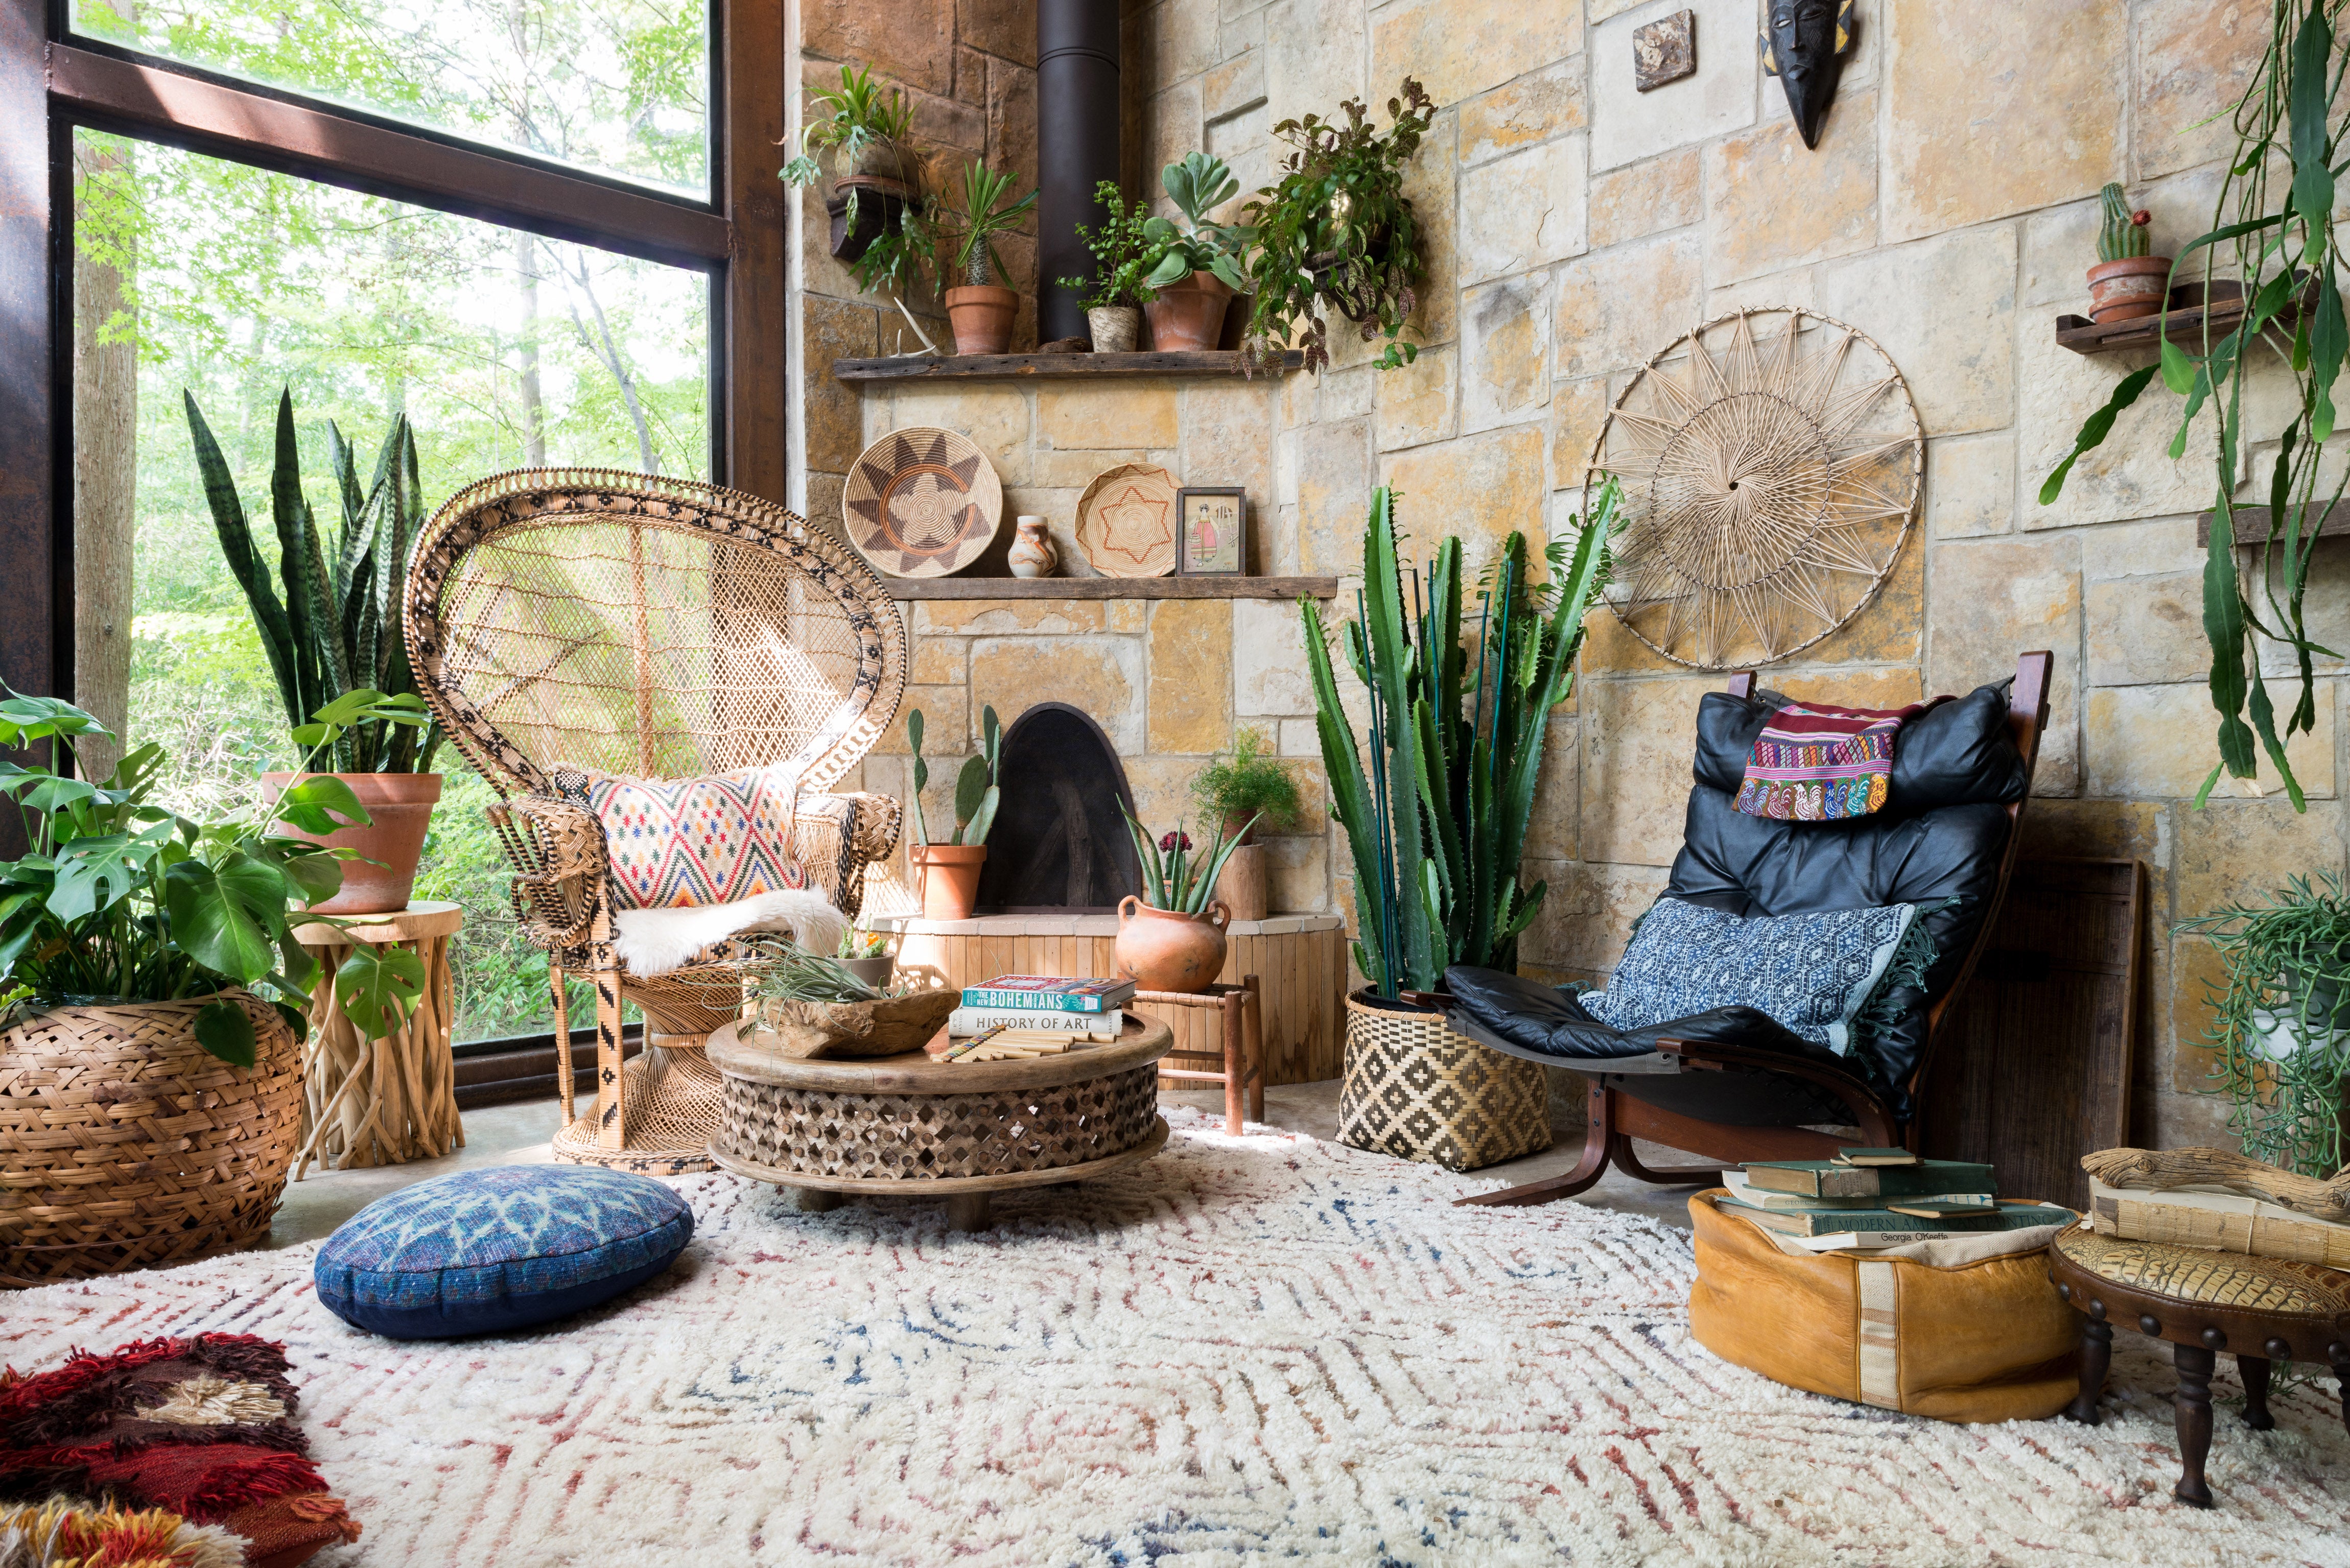 a white shag rug with multi color diamond pattern on the floor. A rattan chair and indonesian coffee table are the two main furniture pieces. The walls are stone and there is a fireplace in the corner. There are many cacti and succulent plants decorating the floor and mantle. 